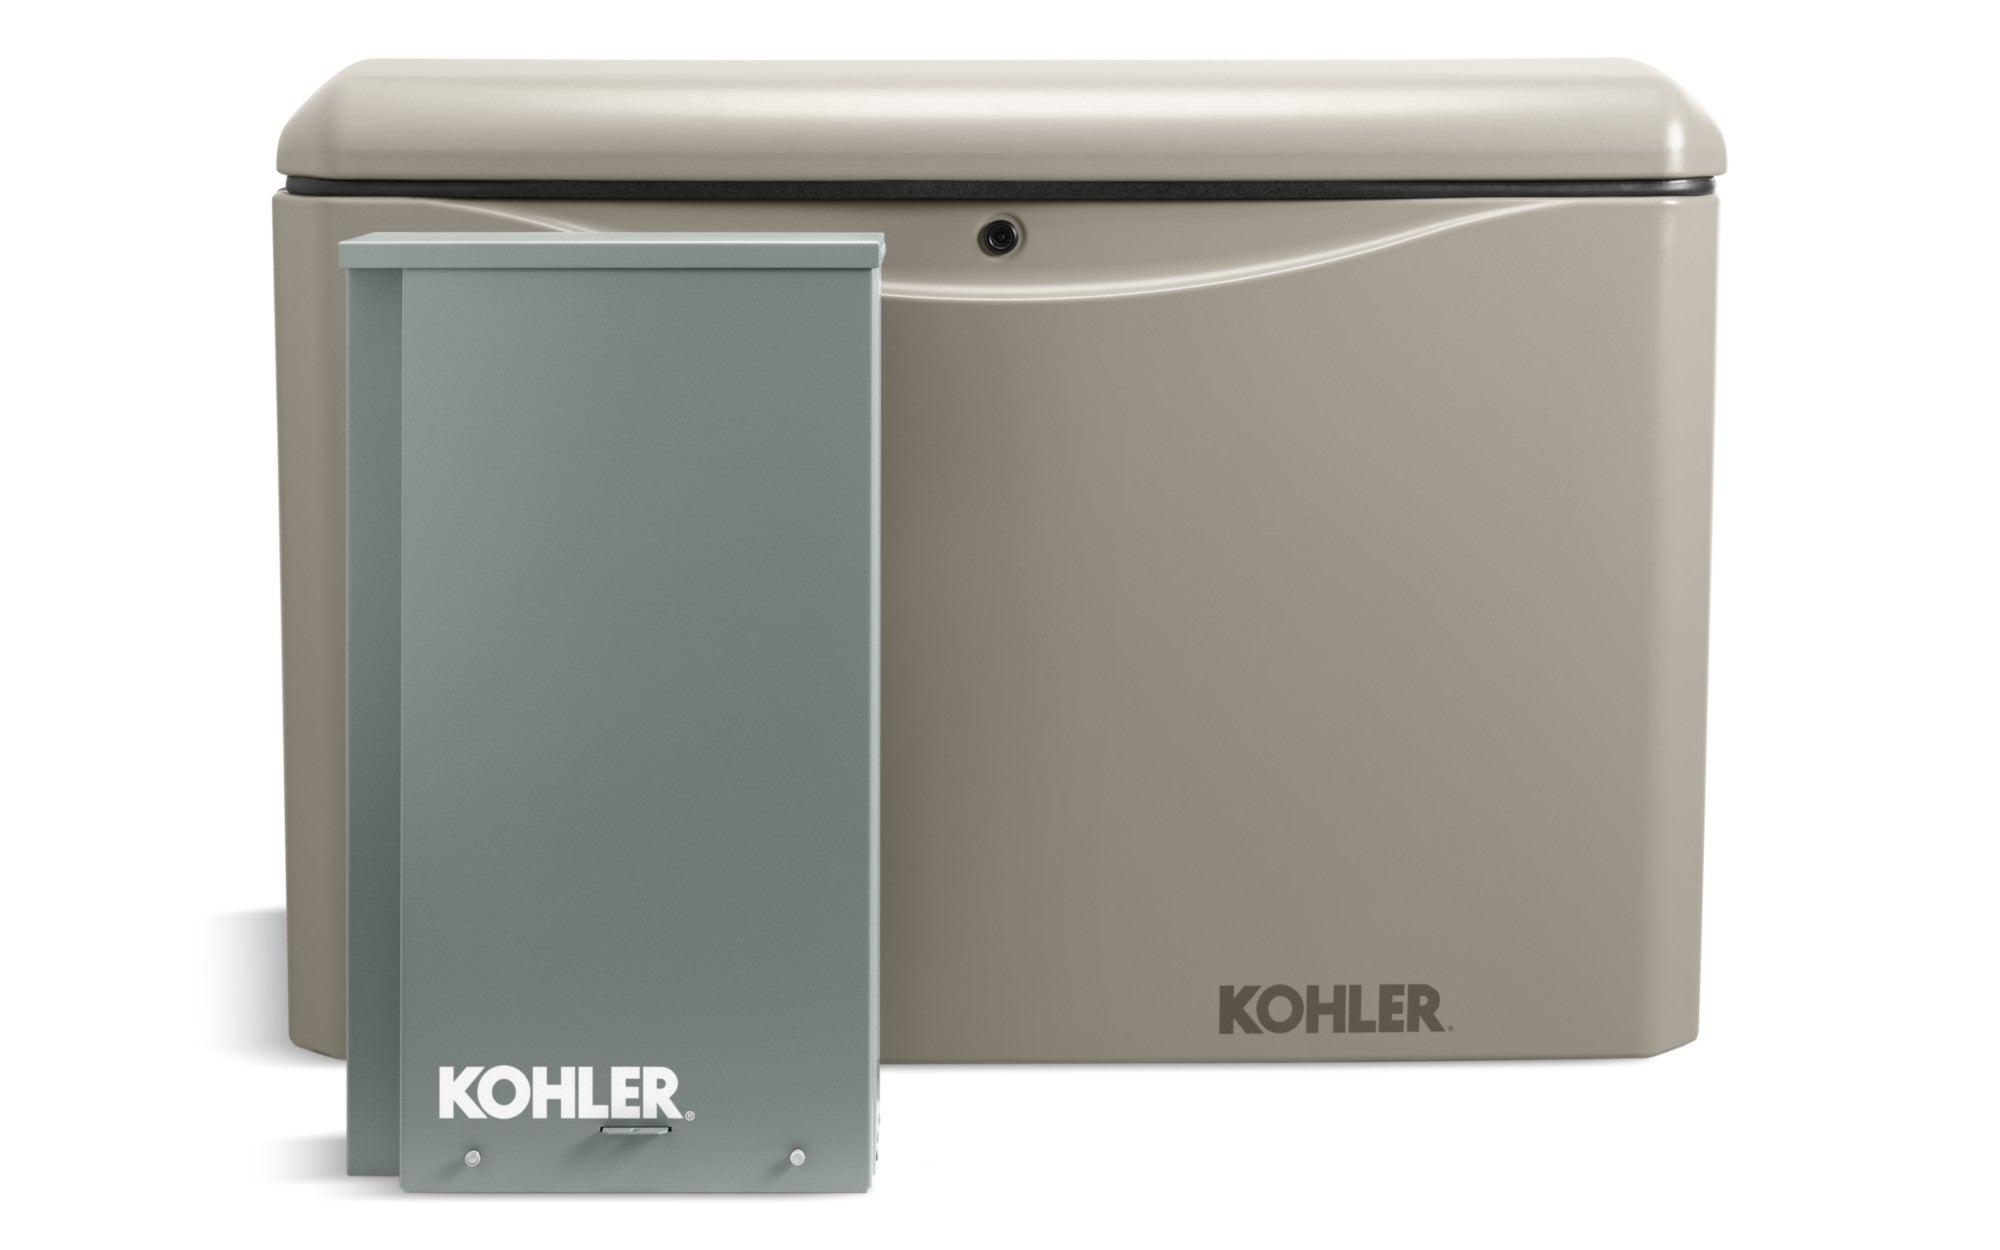 Kohler 14RCAL-100LC16 Air-Cooled Standby Generator with 100 Amp 16-Circuit Transfer Switch Single Phase, 14,000-Watt